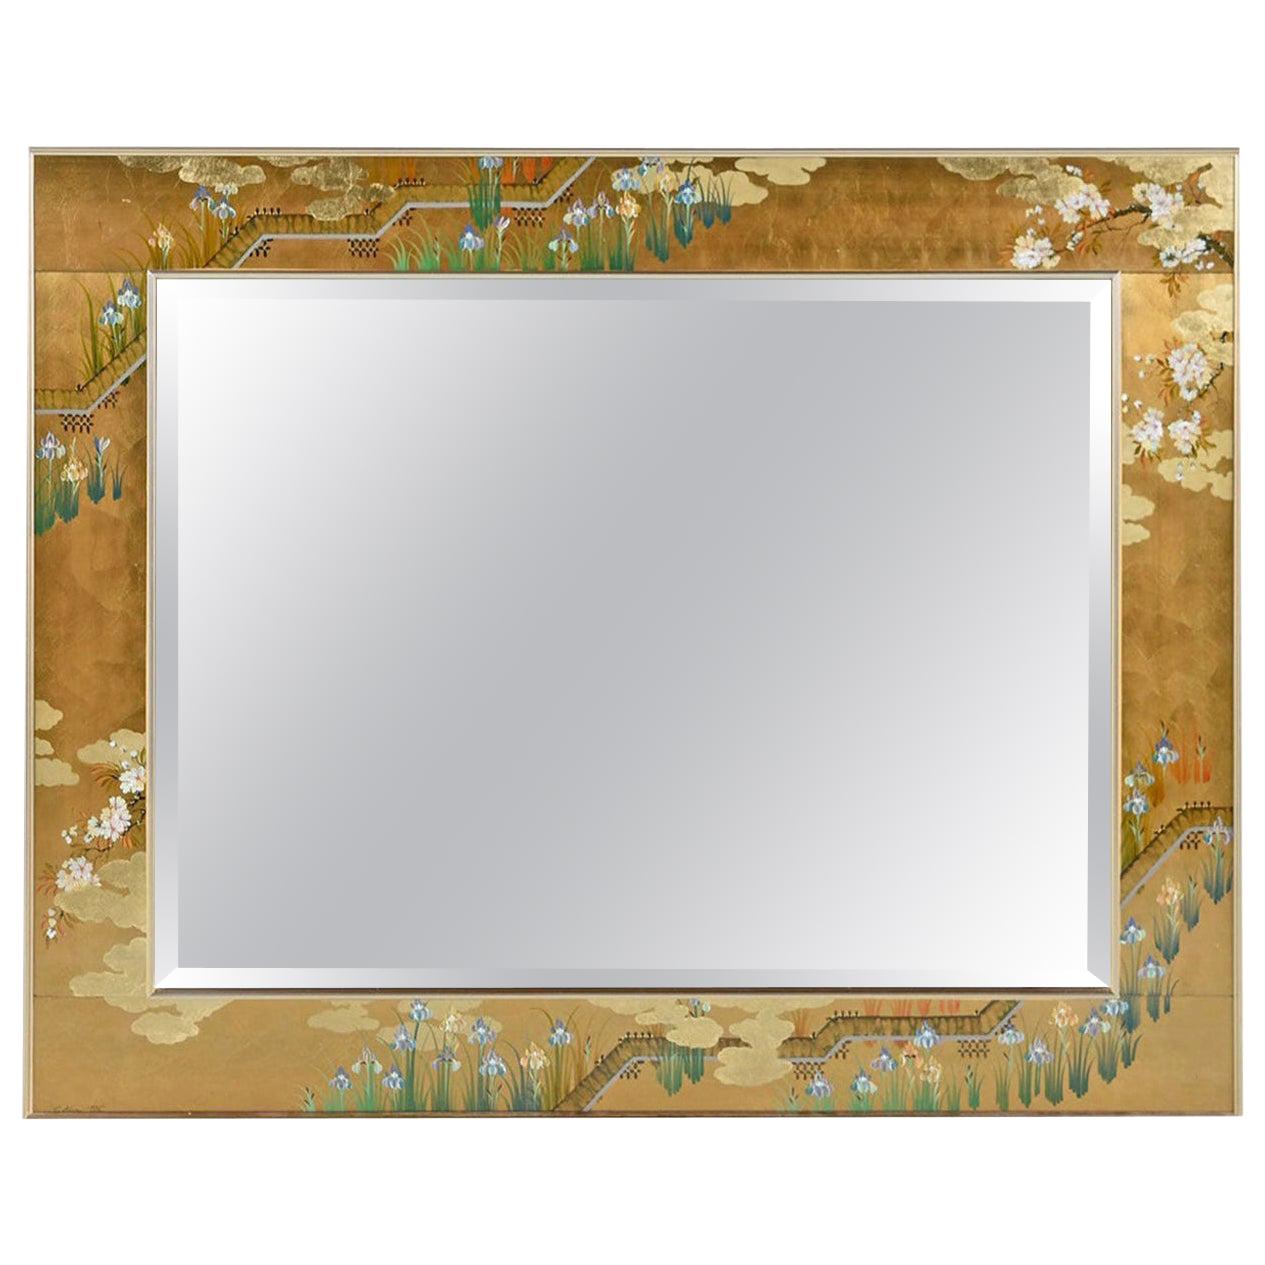 Gold Leaf Églomisé Chinoiserie Brass Frame Mirror by Labarge, Signed and Dated